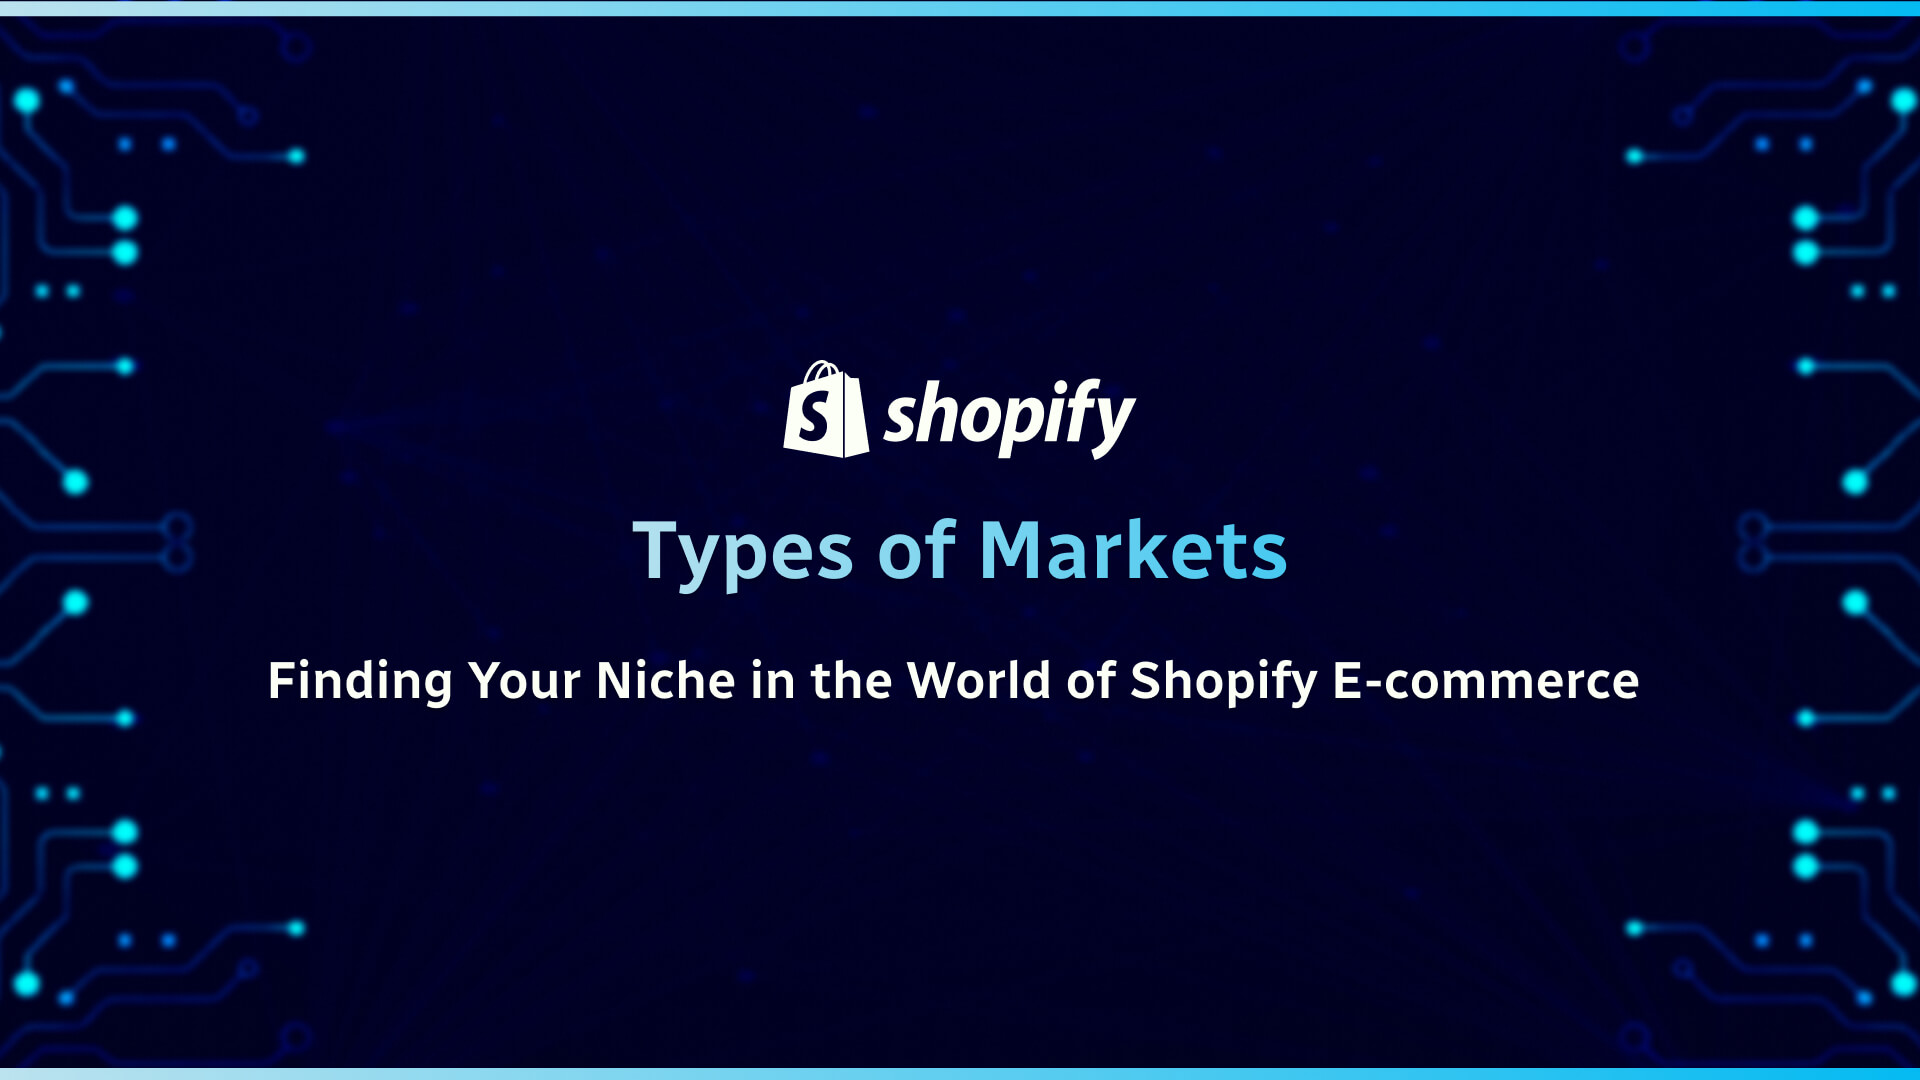 Types of Markets: Finding Your Niche in the World of Shopify E-commerce